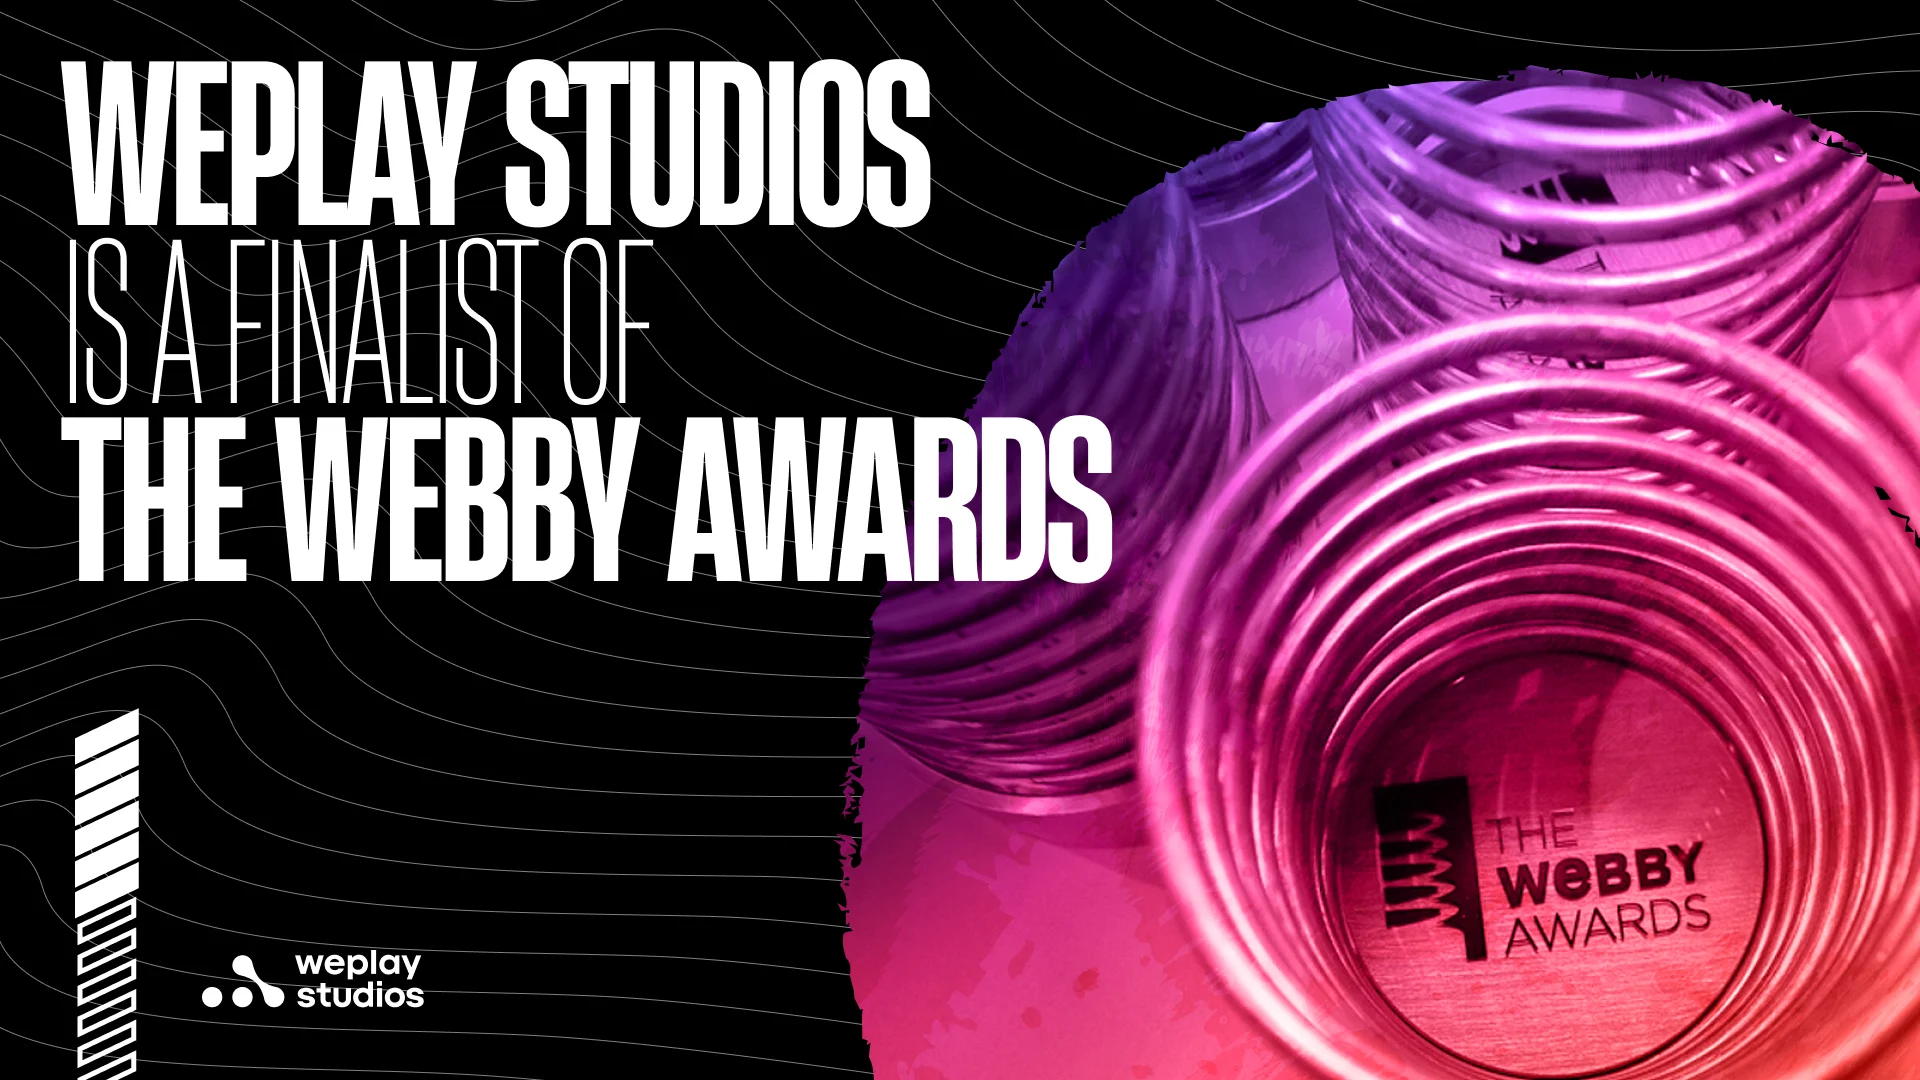 WePlay Studios is a finalist of the Webby Awards. Visual: WePlay Studios